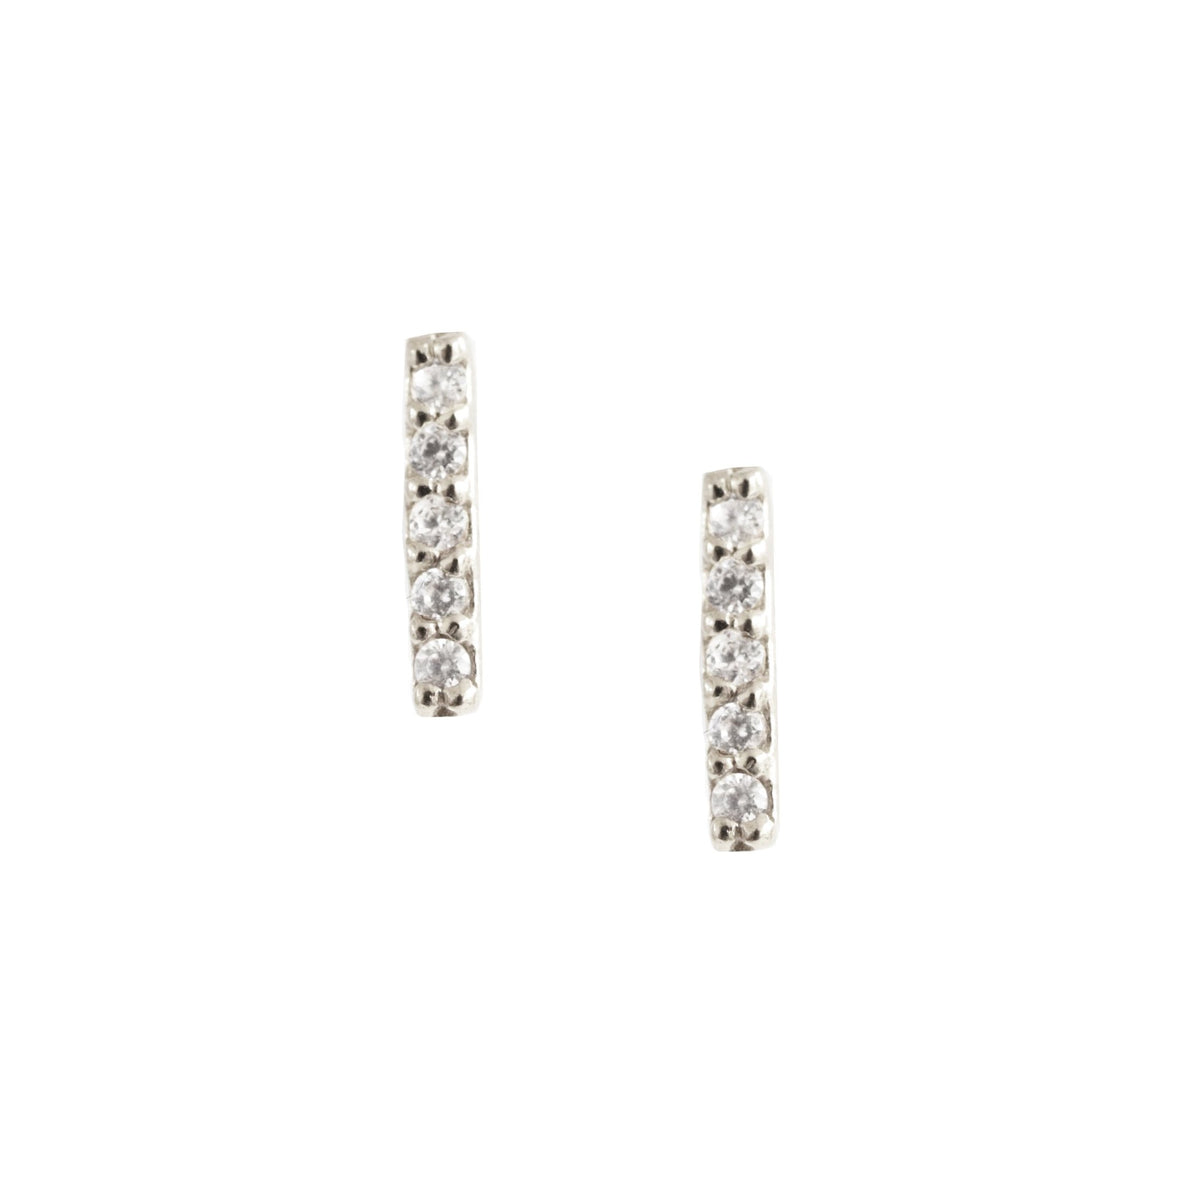 TINY LOVE BAR STUDS - CUBIC ZIRCONIA &amp; SILVER - SO PRETTY CARA COTTER